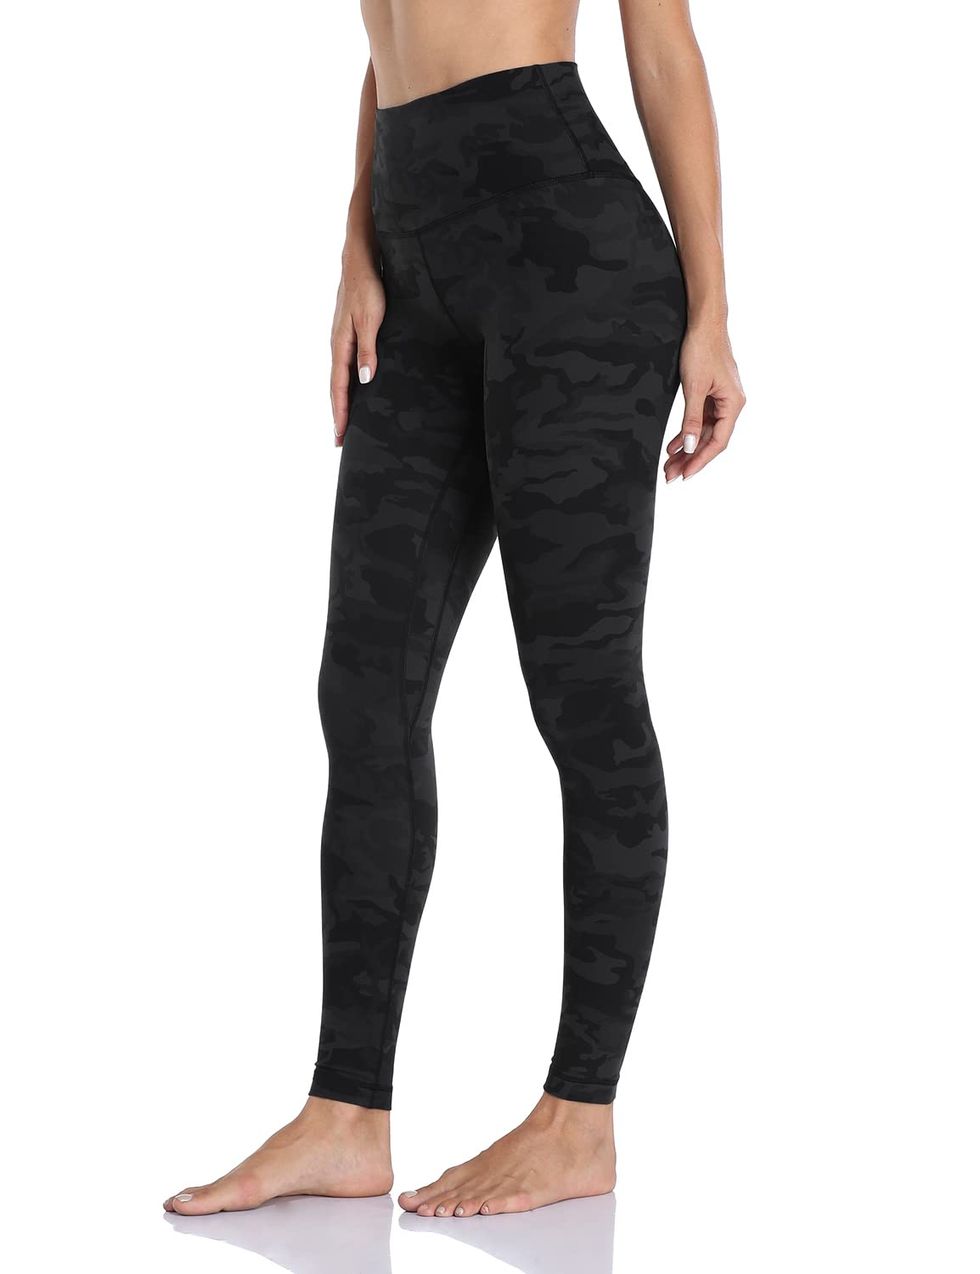 HeyNuts Essential Joggers Workout and Yoga Pants